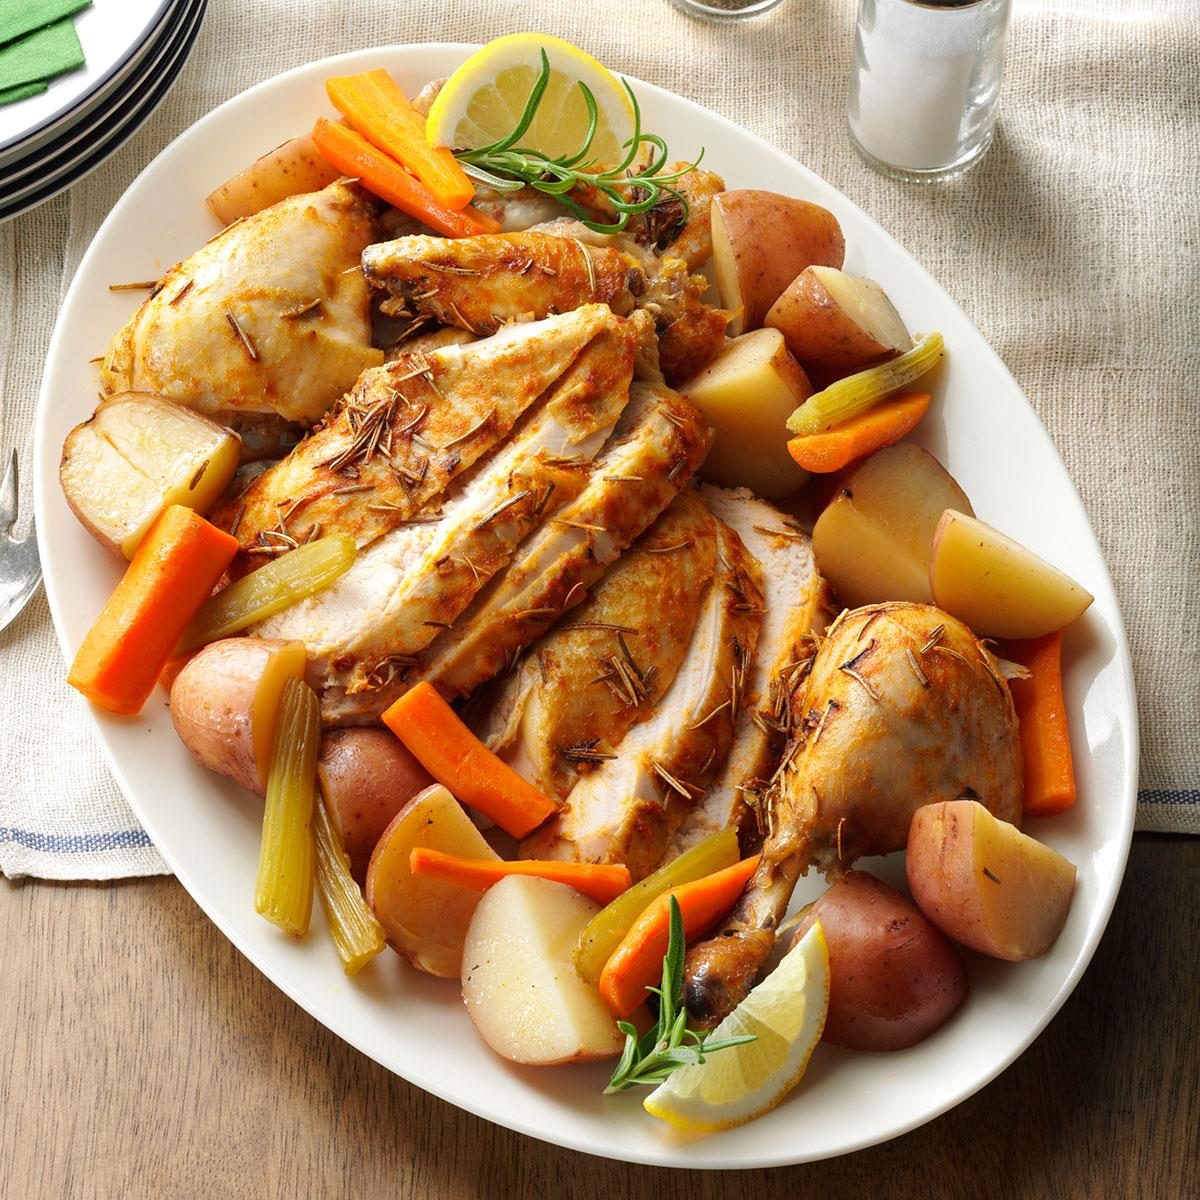 Broil Chicken with Veggies Recipe
